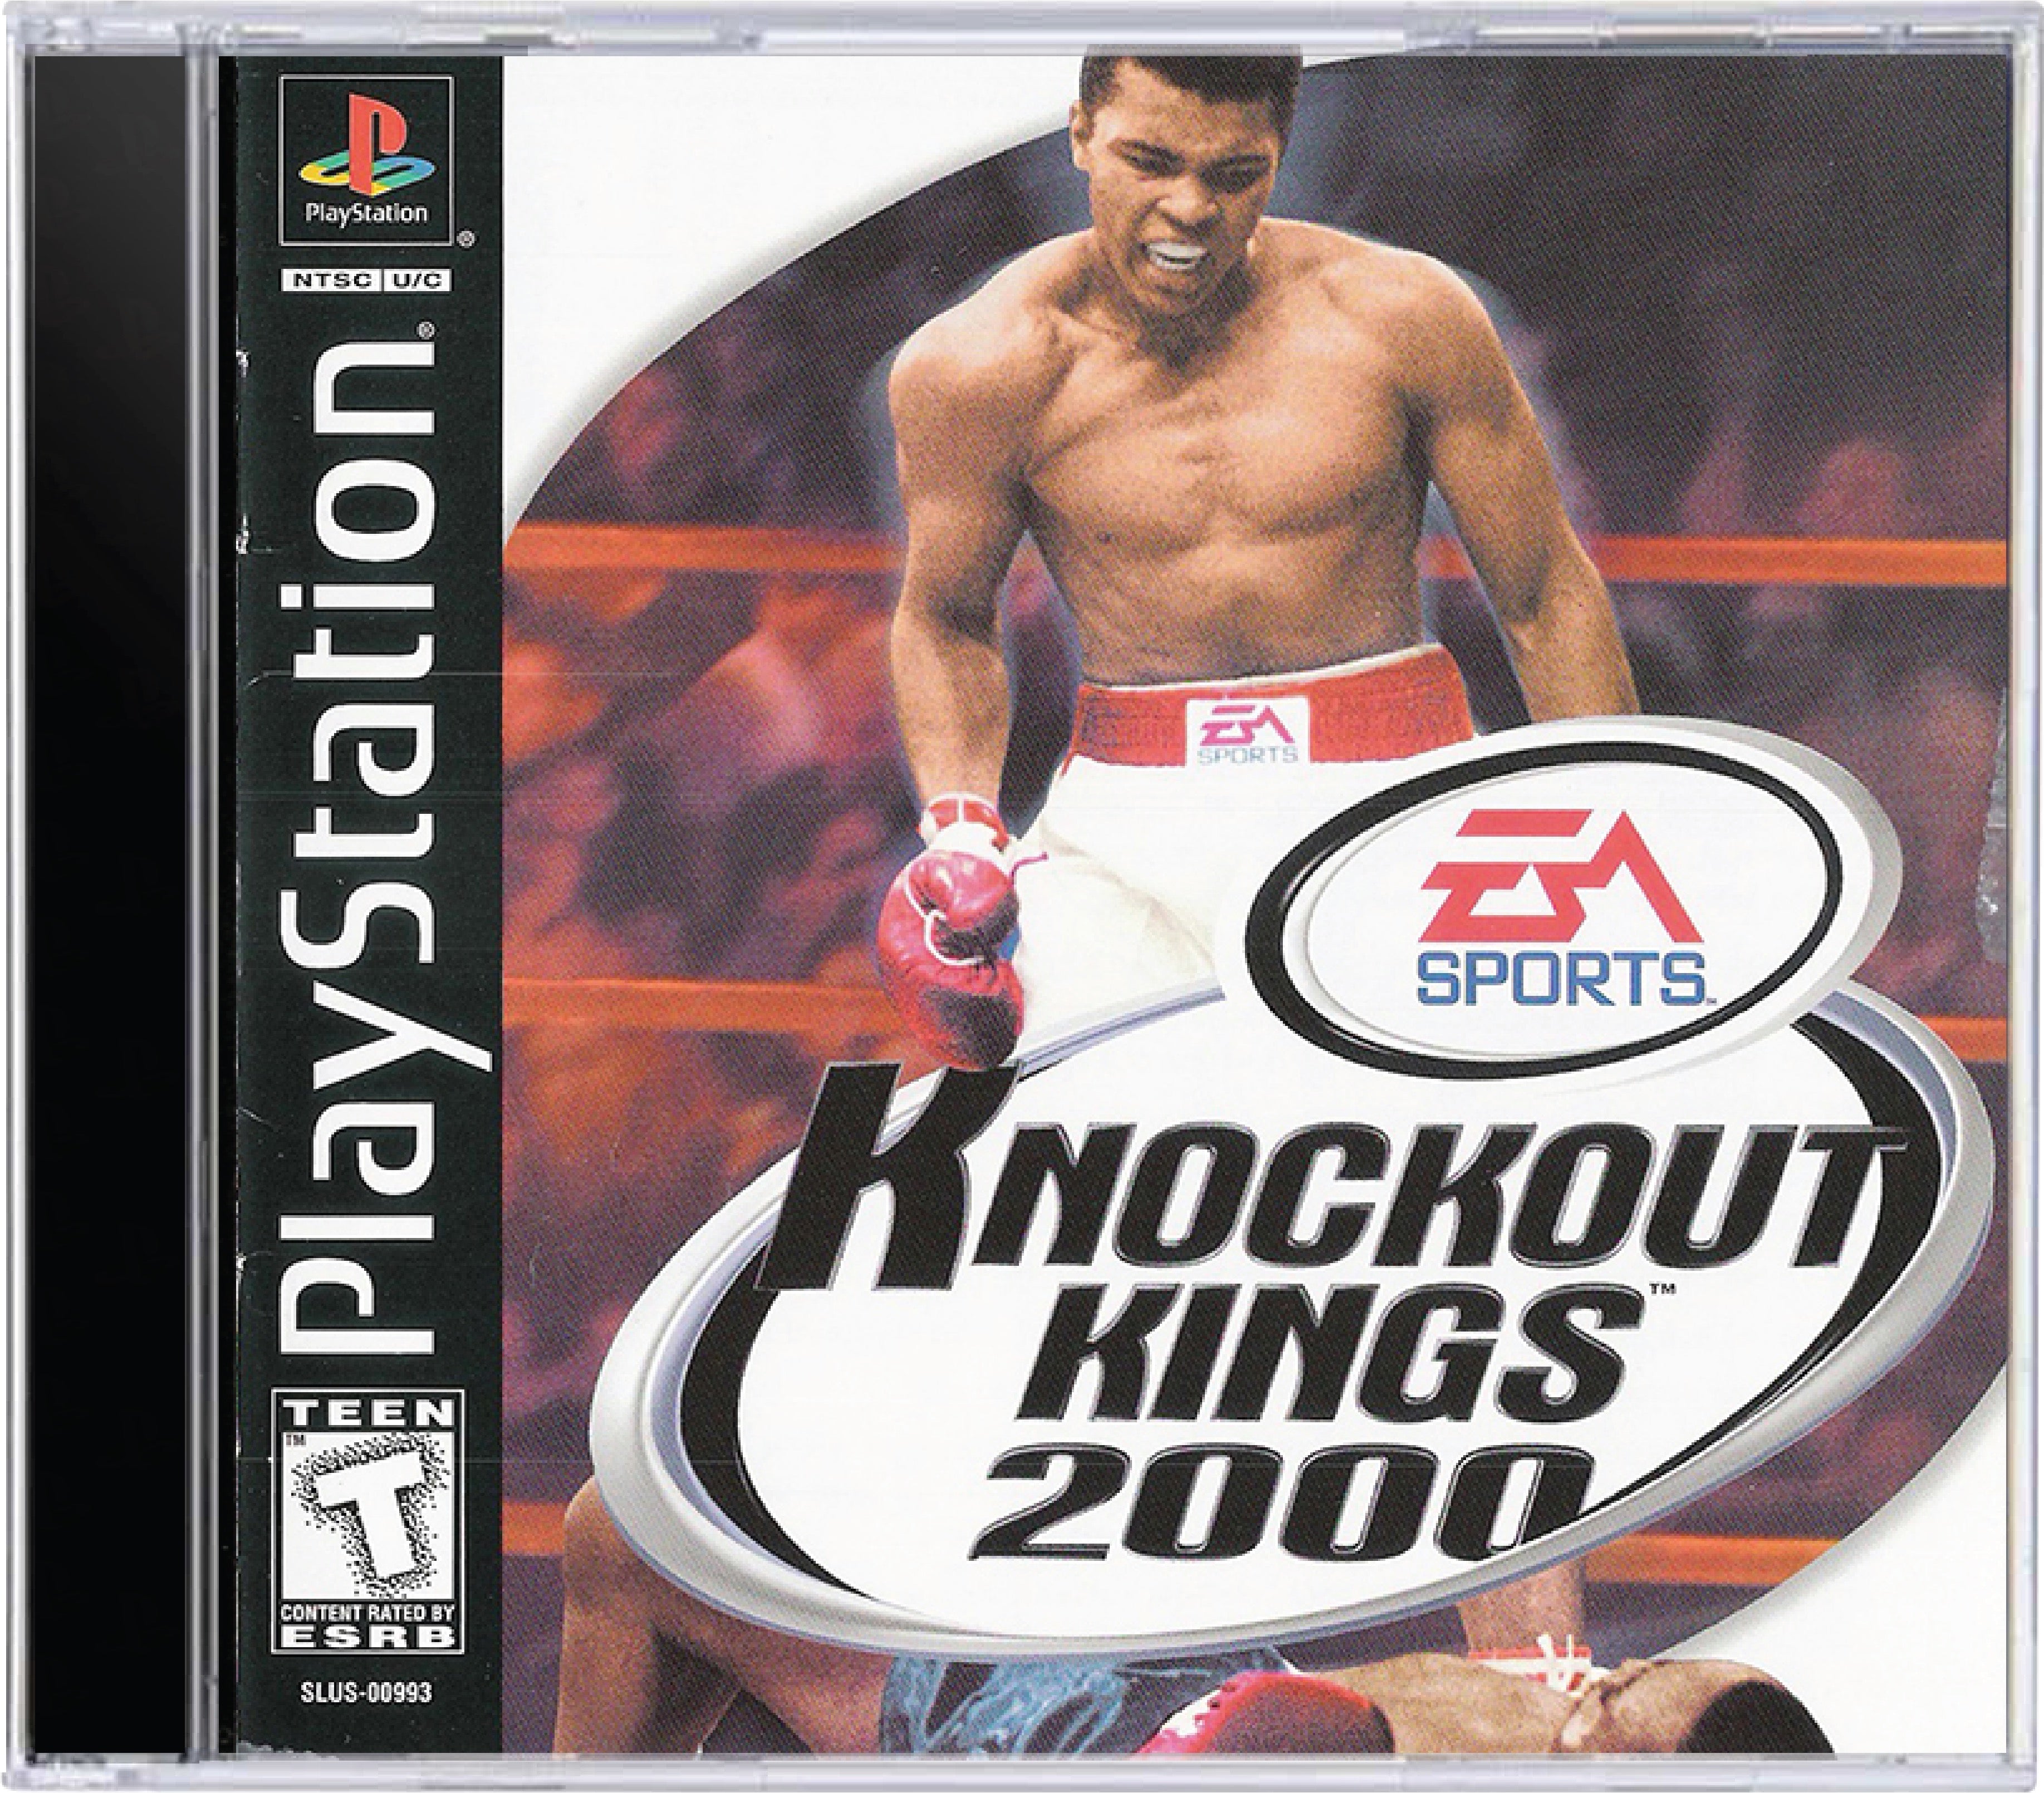 Knockout Kings 2000 Cover Art and Product Photo